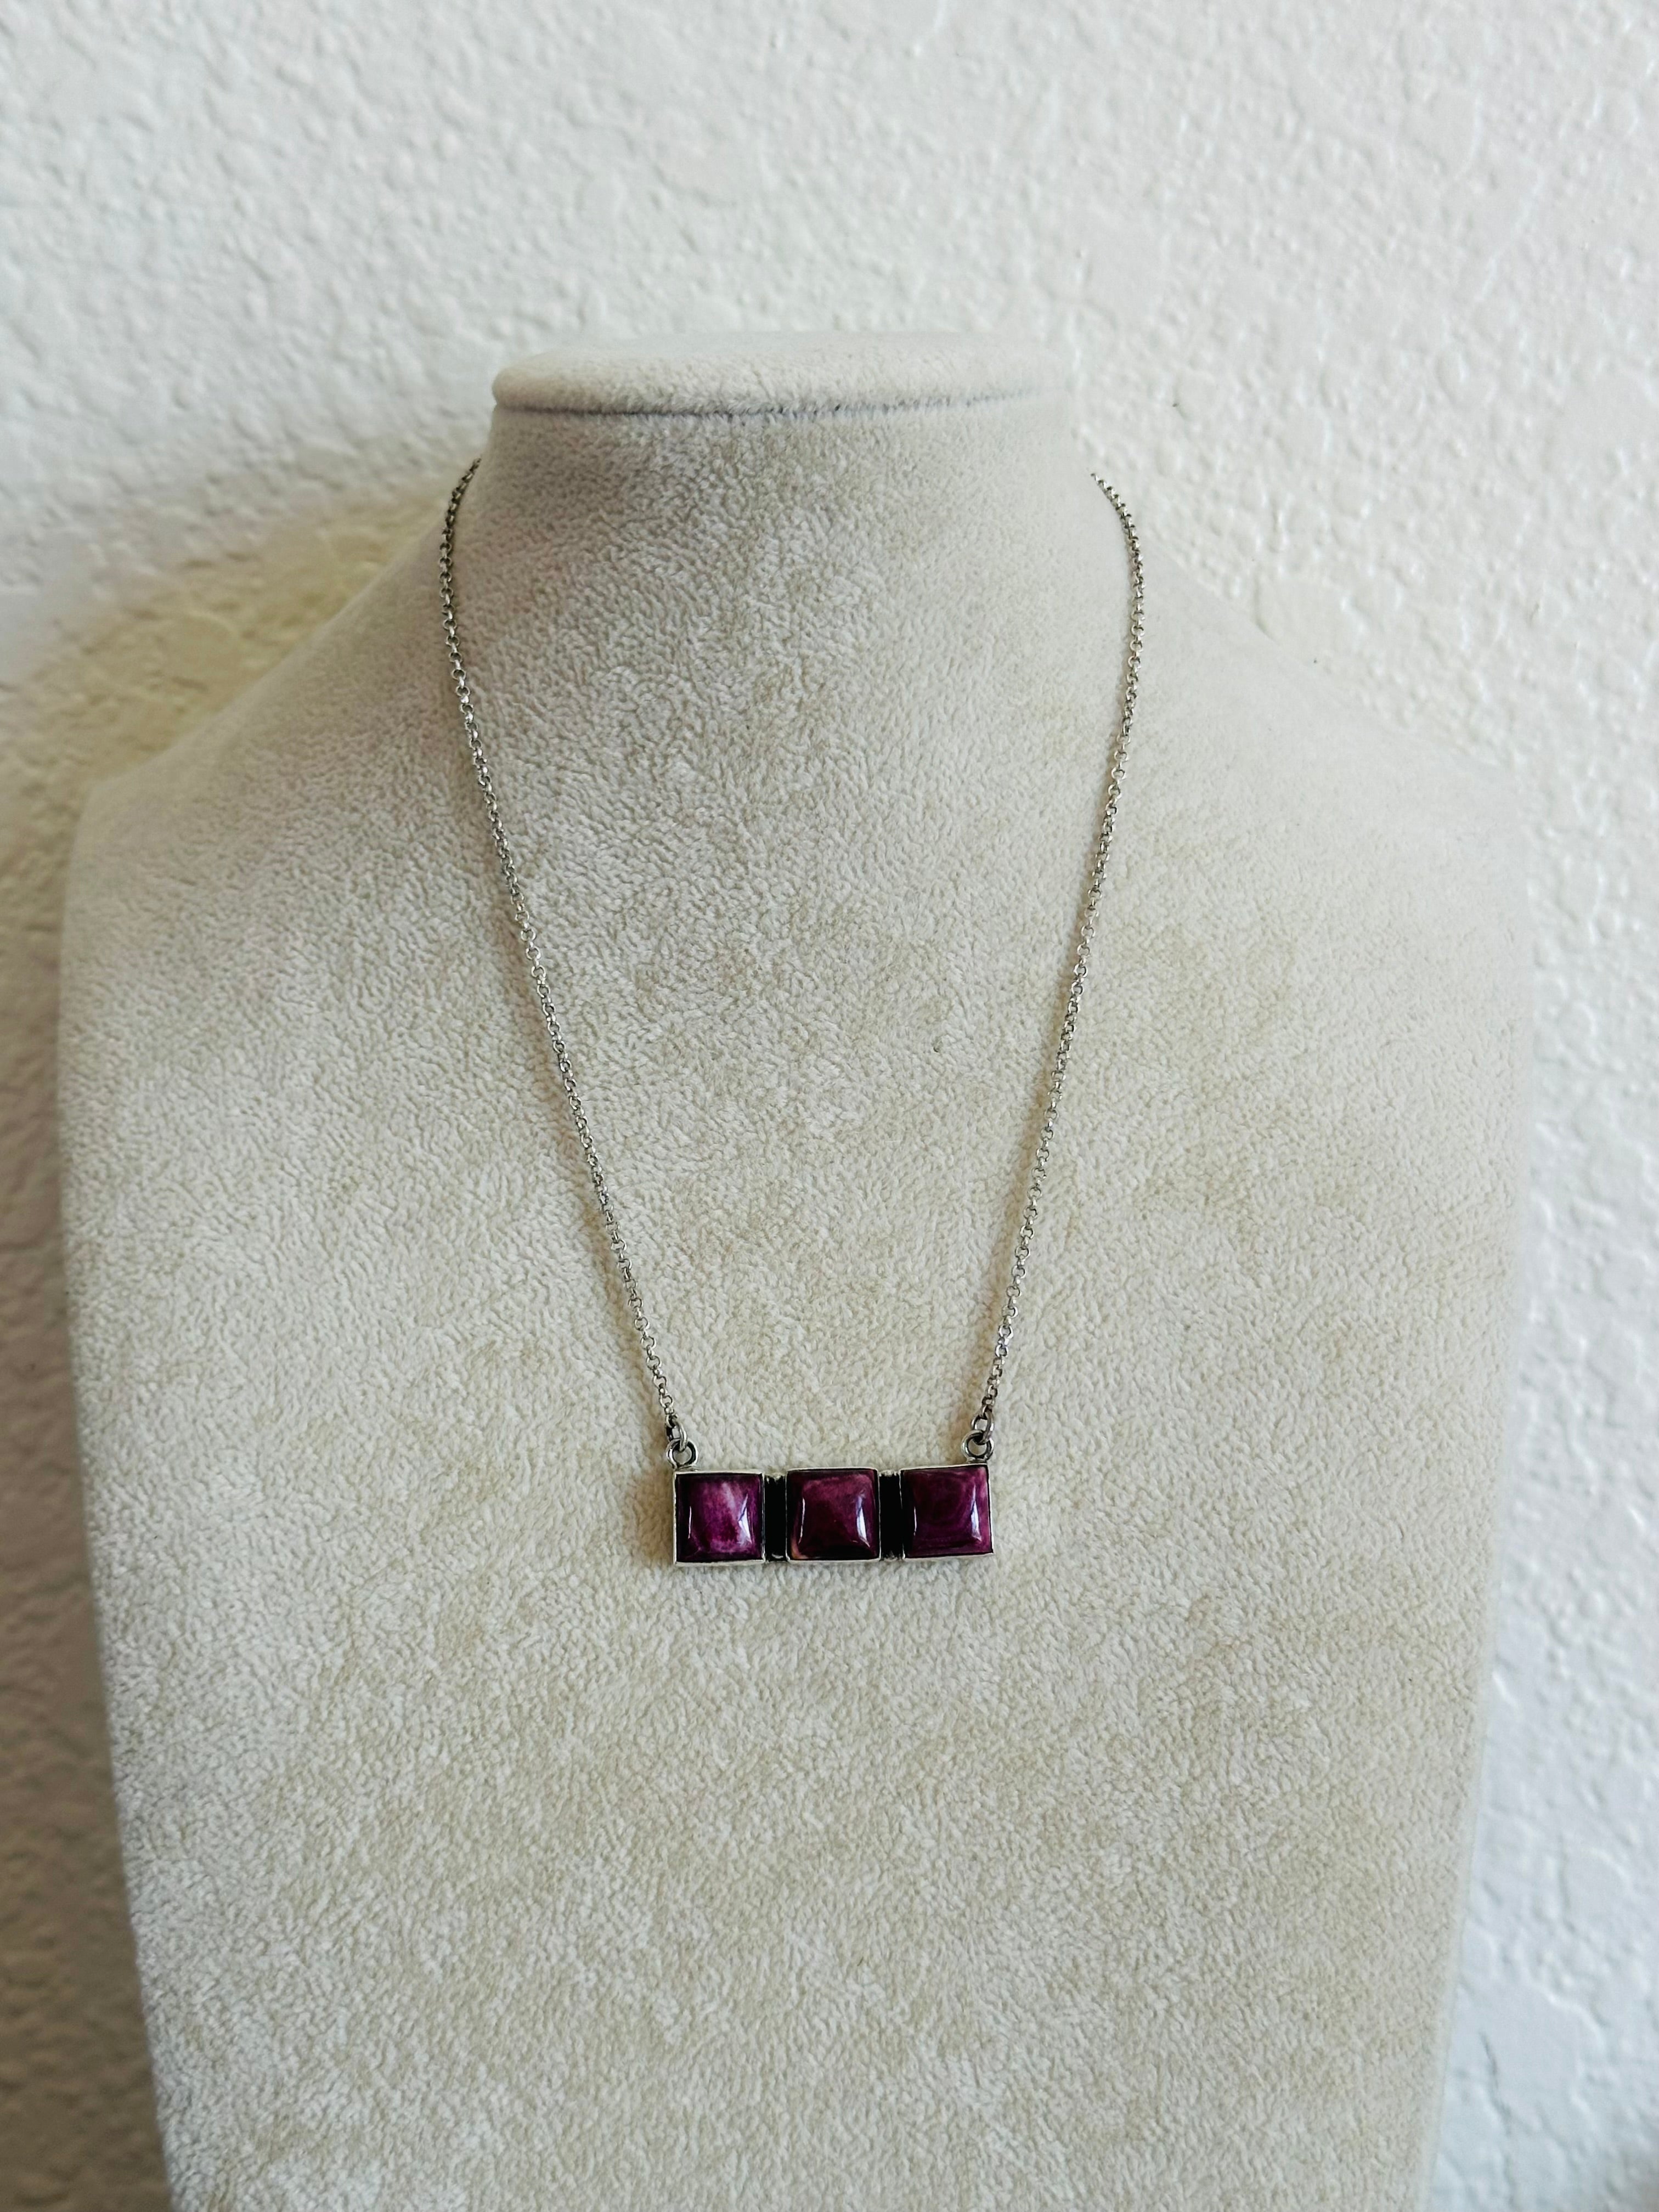 Southwest Handmade Purple Spiny Oyster & Sterling Silver Cluster Necklace